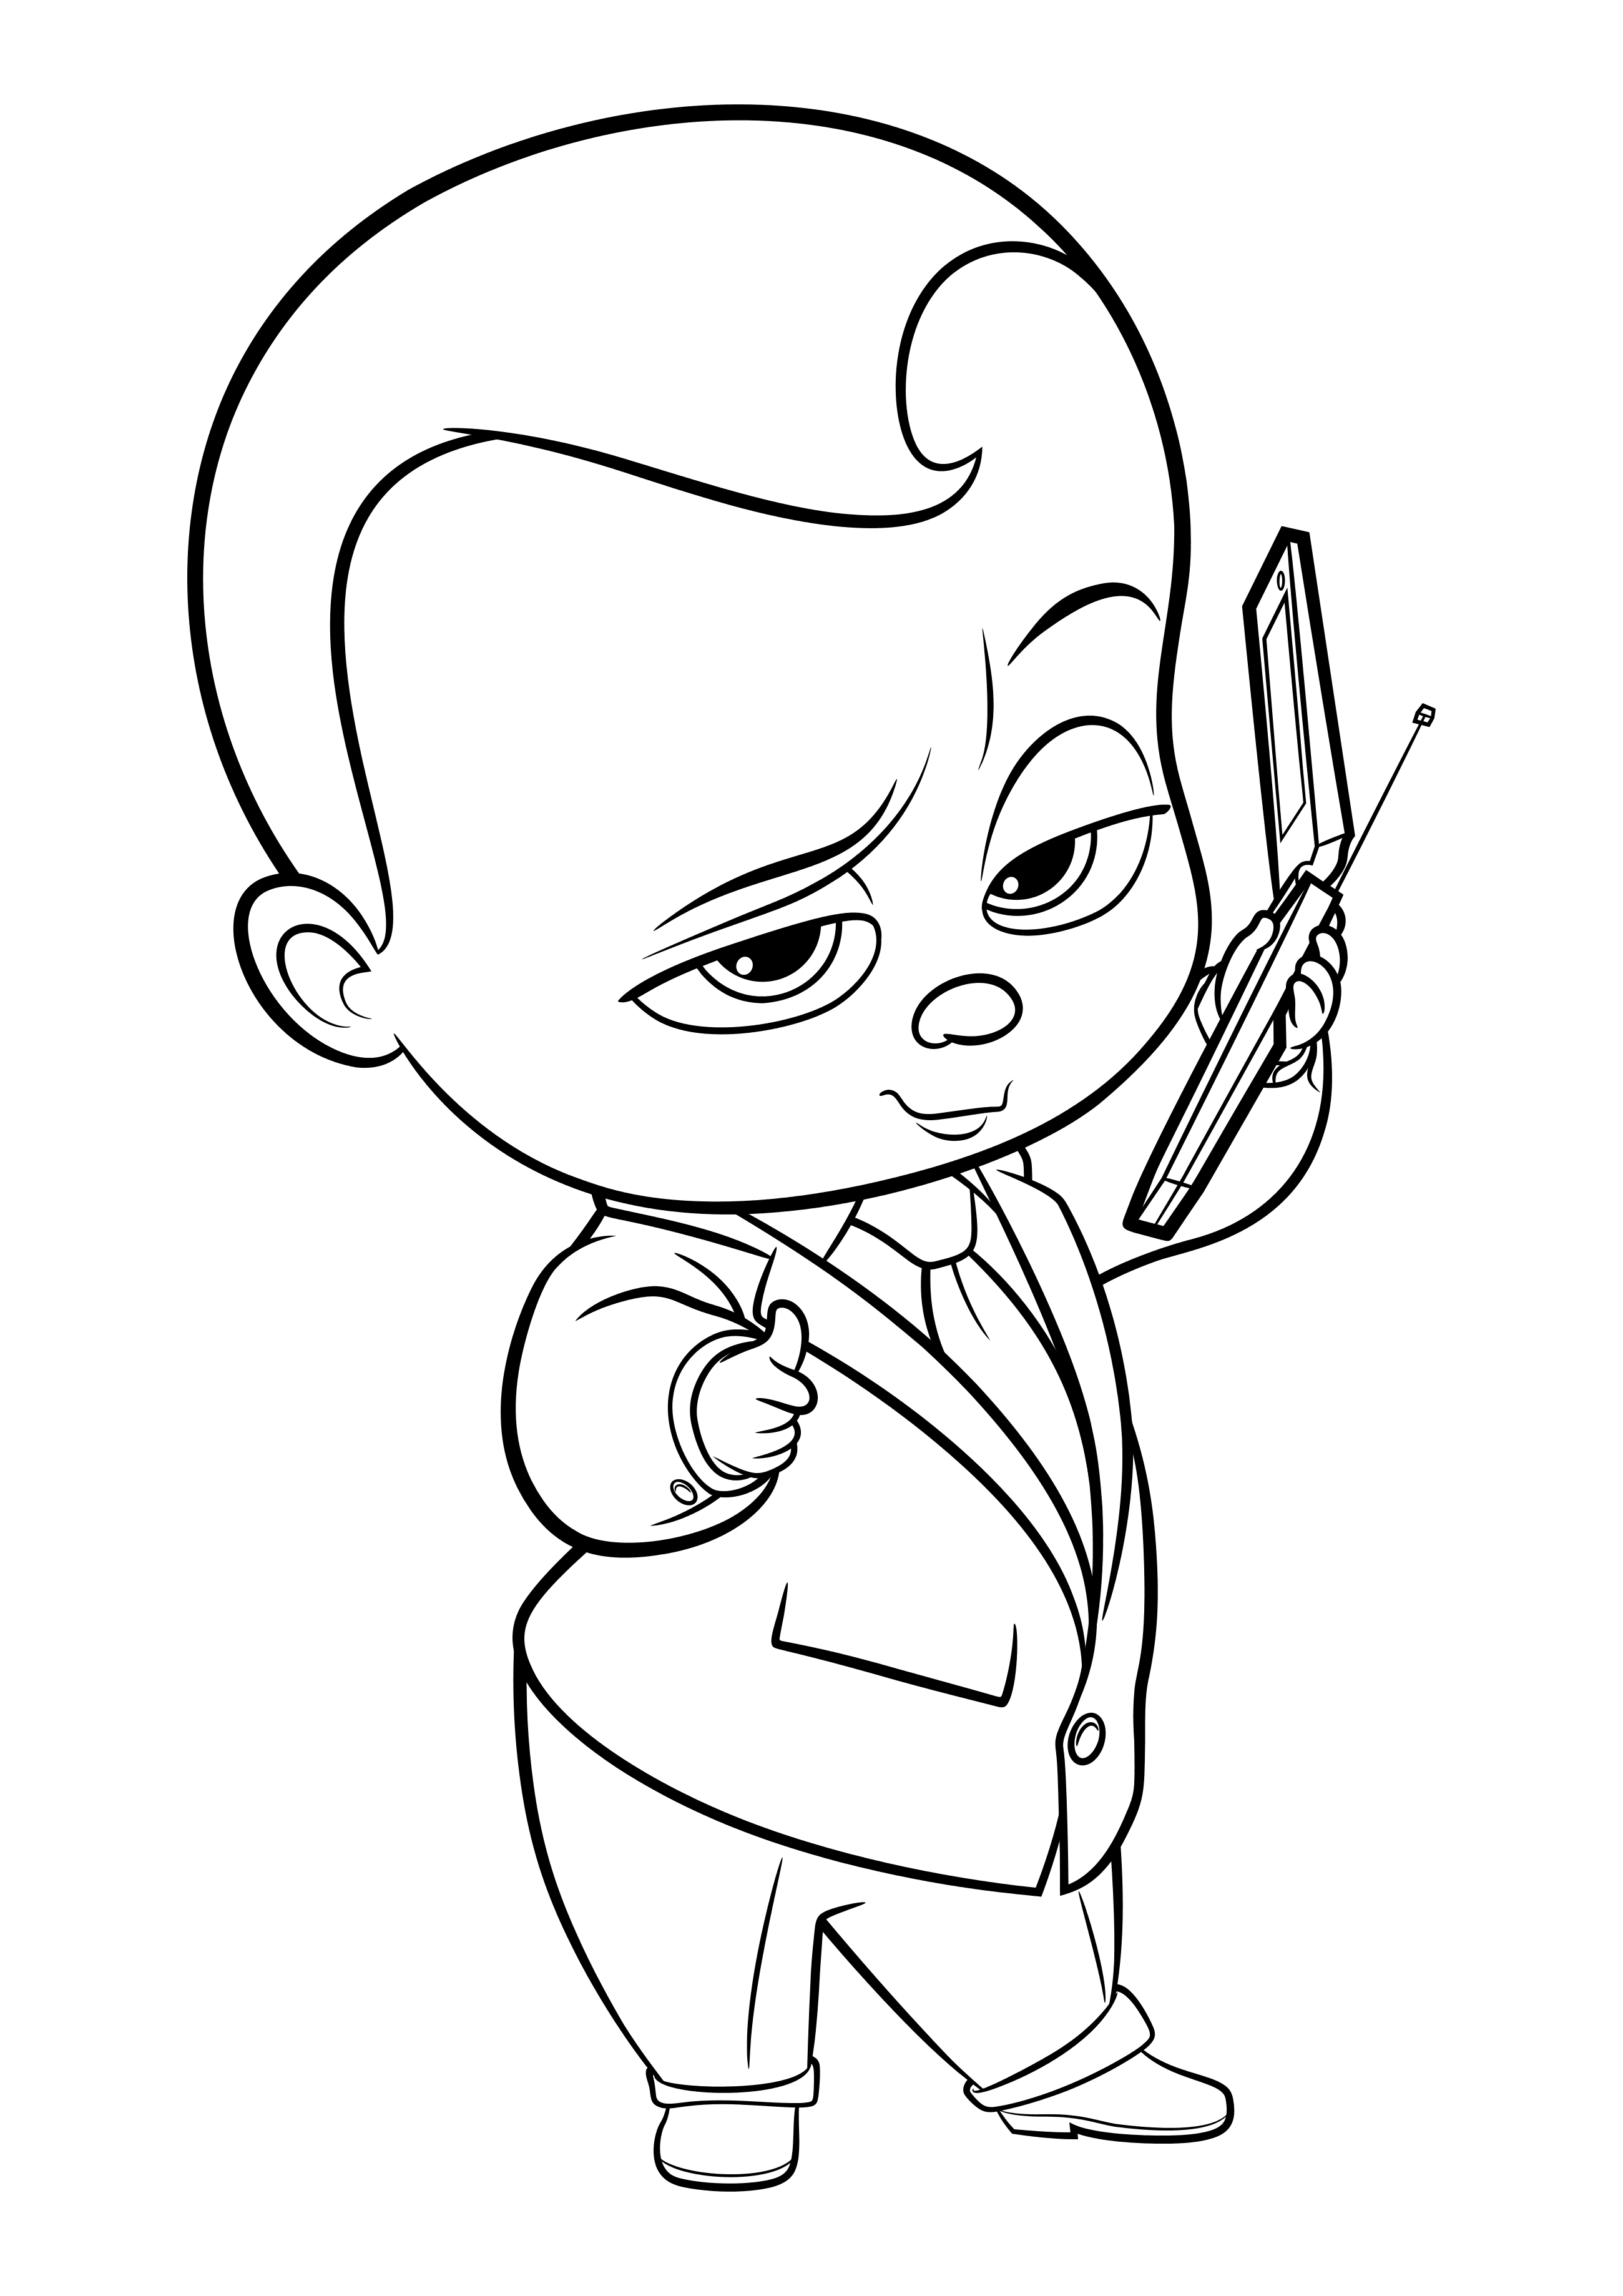 Coloring page Boss Baby 2 Cartoon The Boss Baby 2